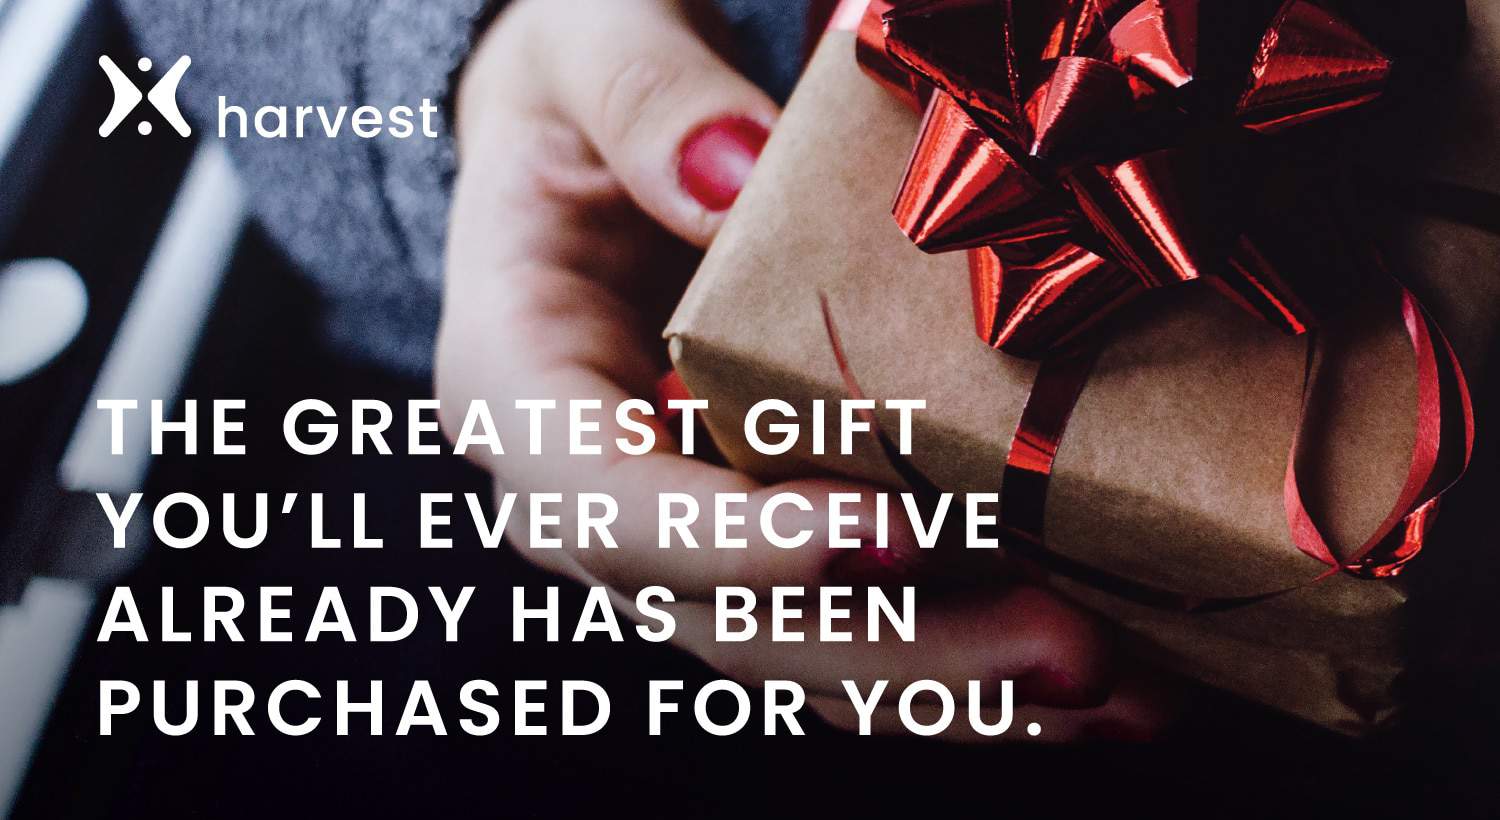 Top 10: What was the best gift you have ever given or received? - YP